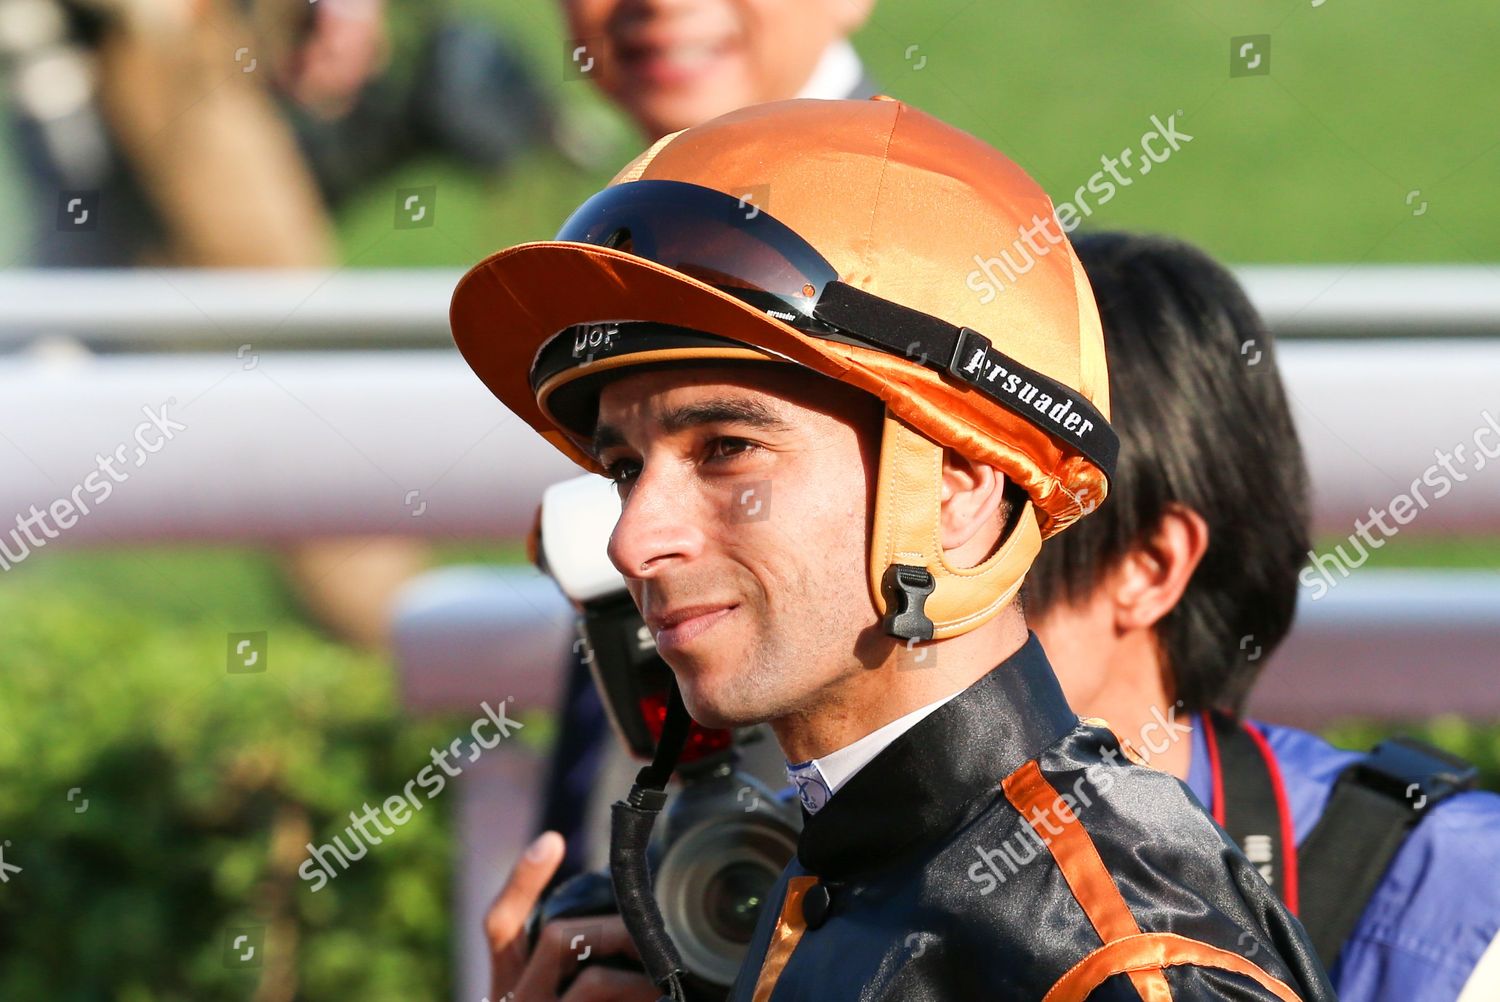 Able Friend Under J Moreira Wins Longines Editorial Stock Photo Stock Image Shutterstock